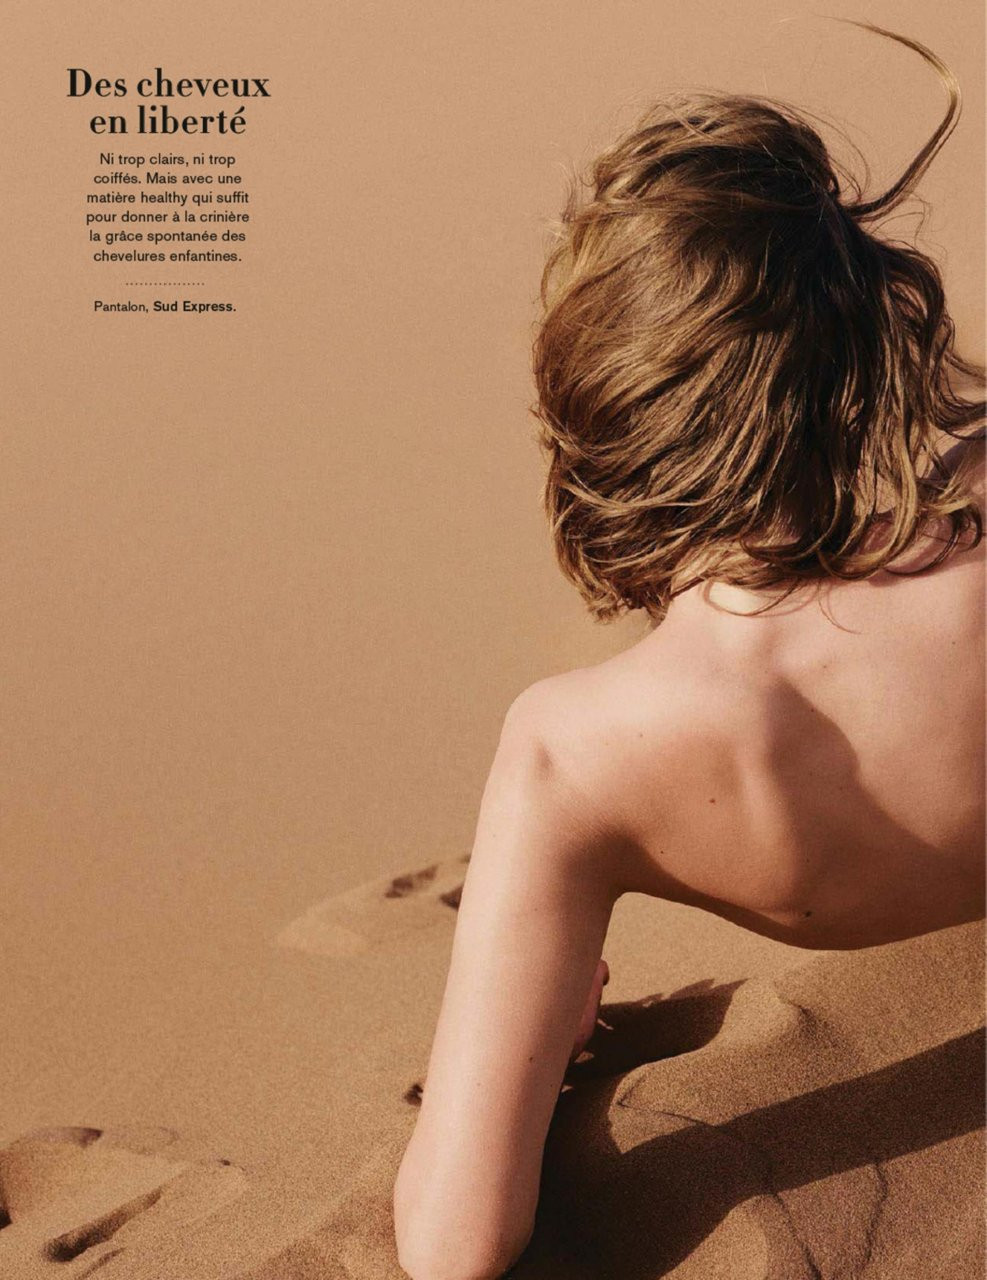 Frida Gustavsson Topless 21 TheFappening.nu 